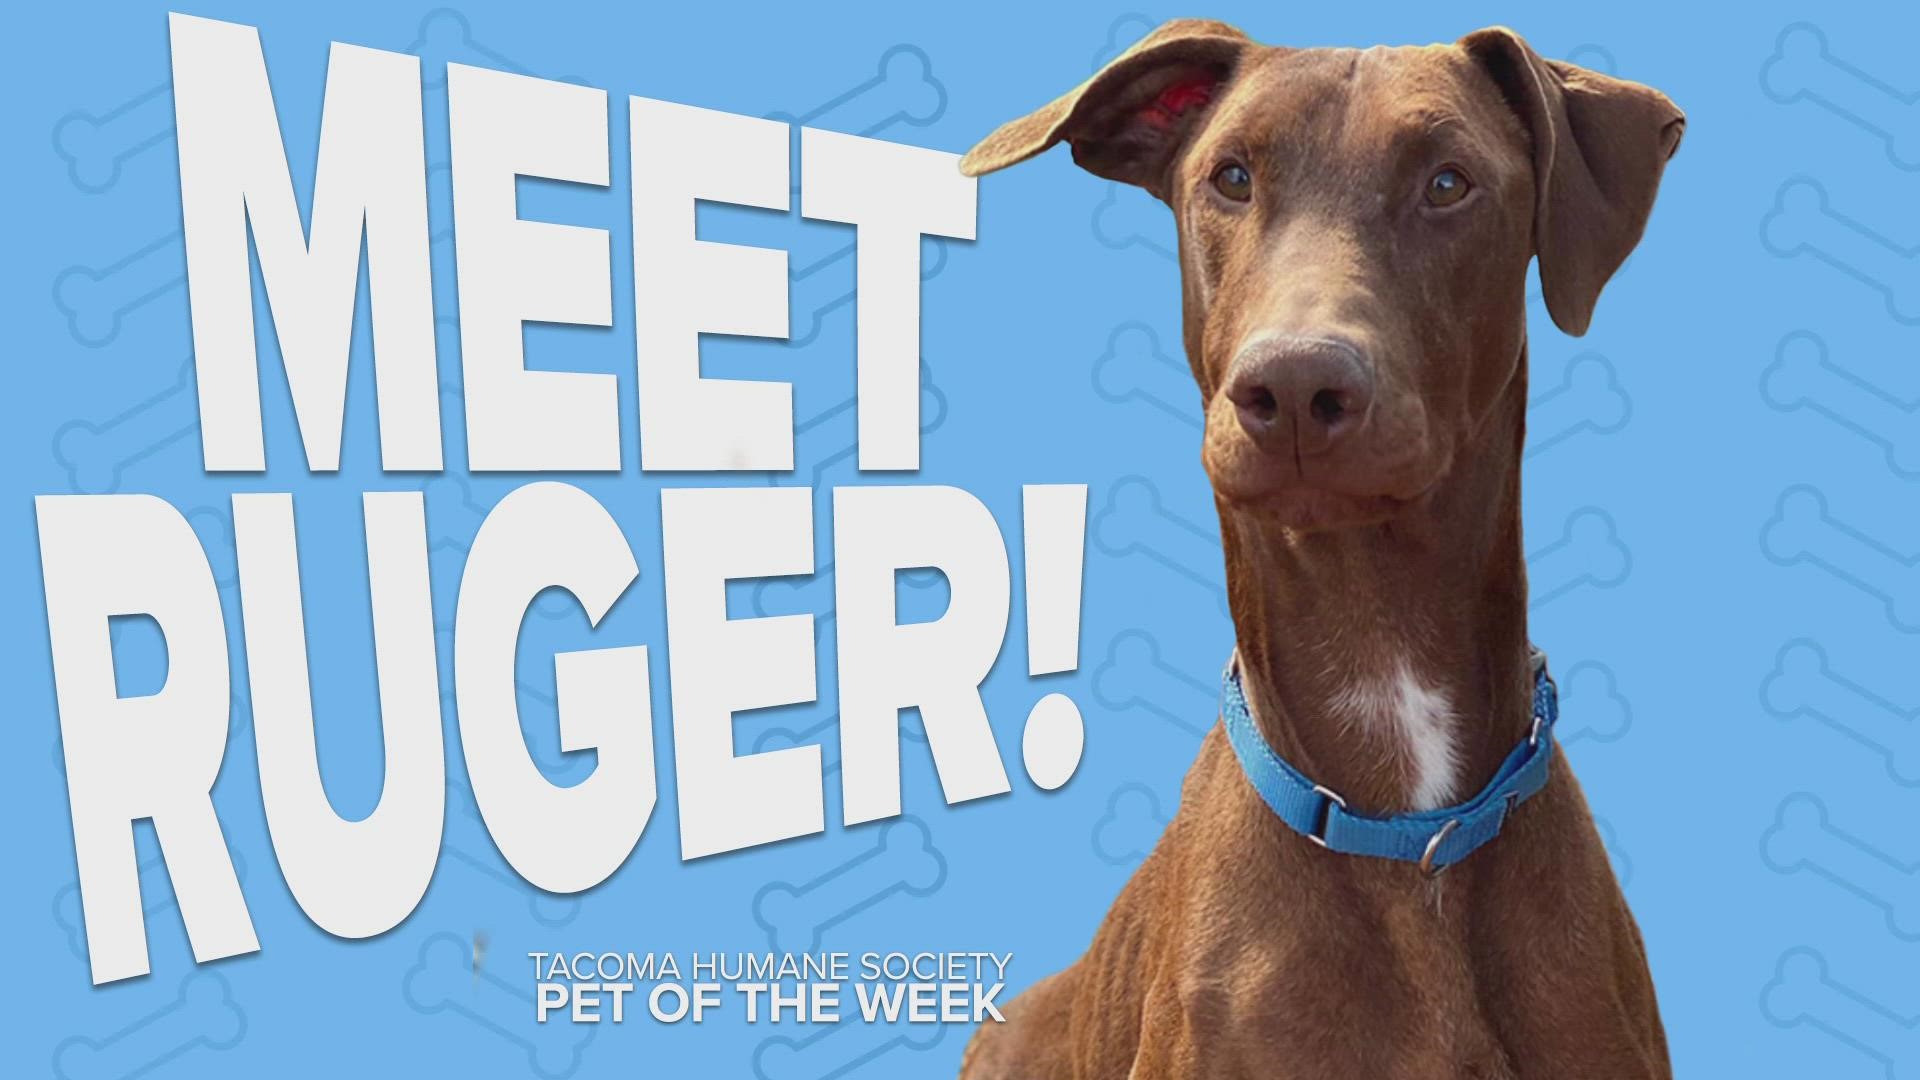 This week's featured adoptable pet is Ruger!